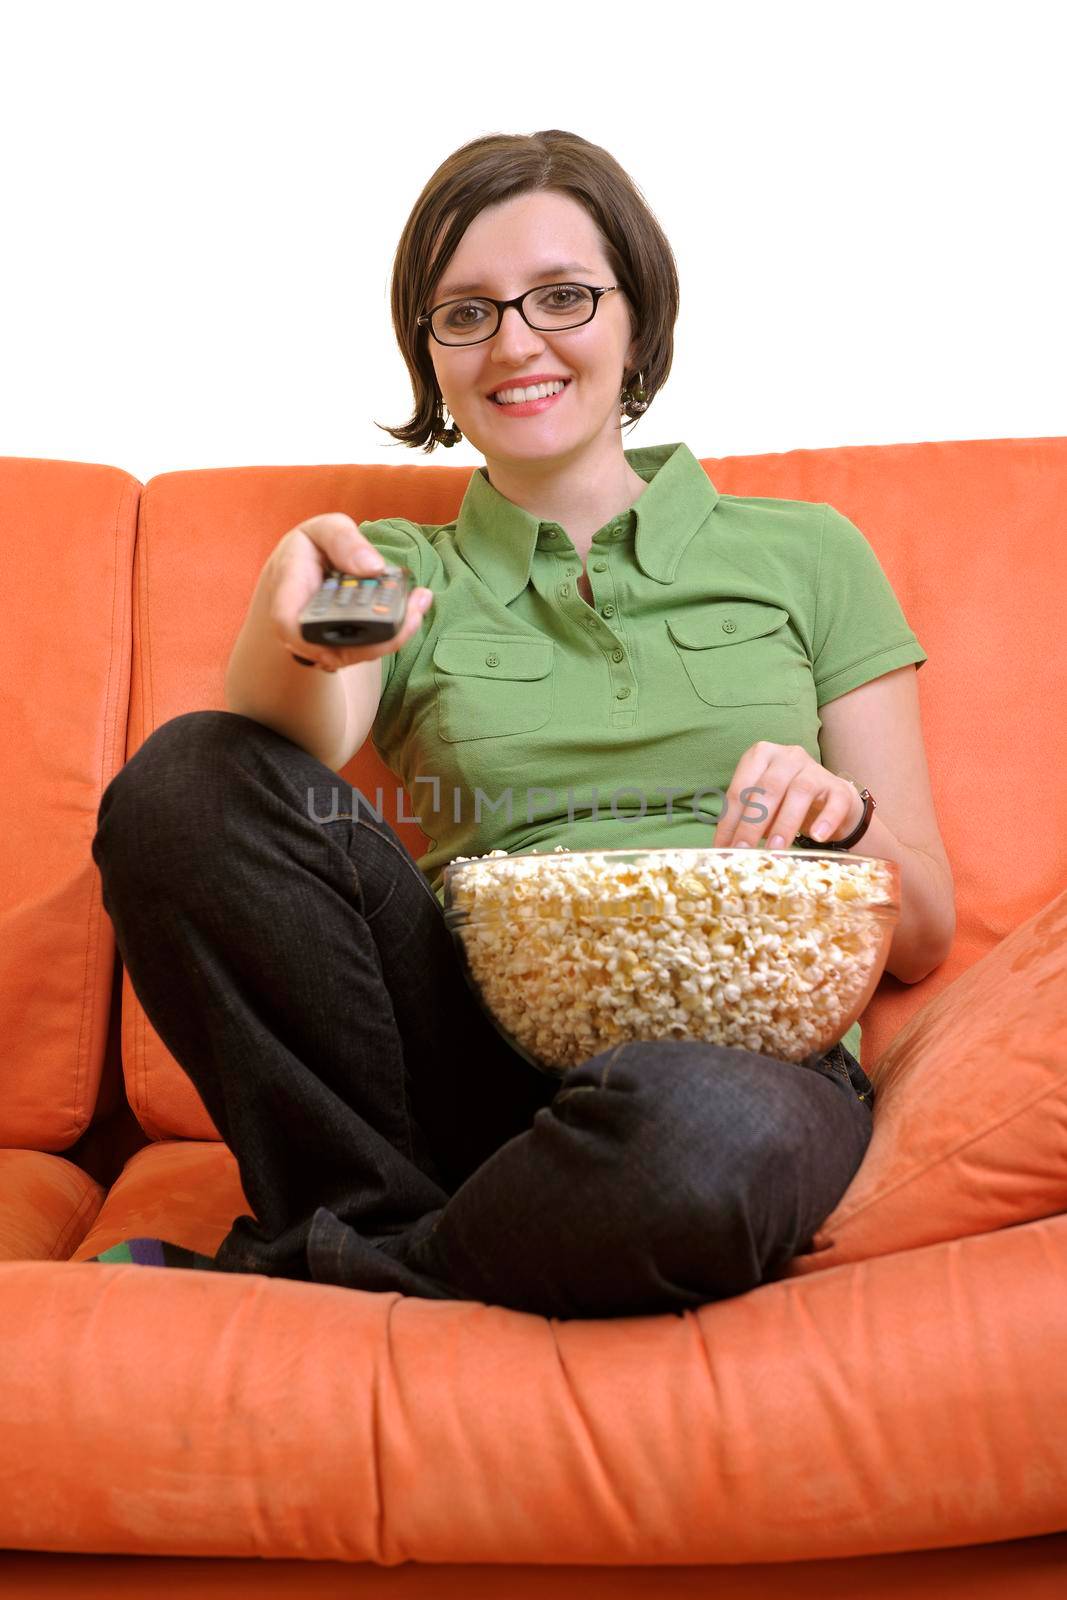 young woman eat popcorn, watching movies and eat popcorn at modern home living room  isolated on white background